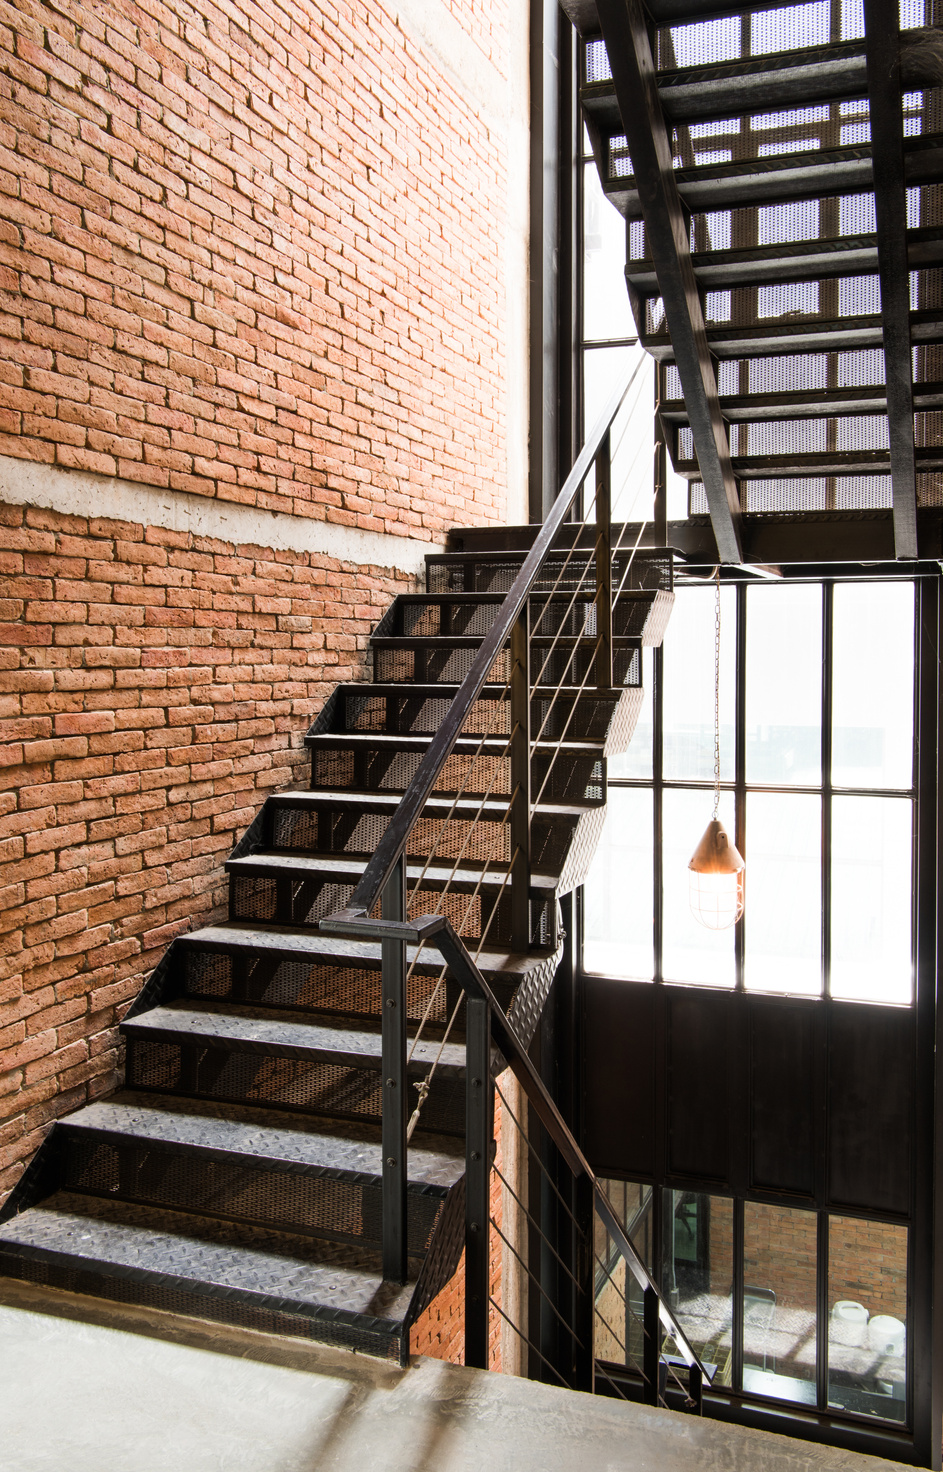 The black stairs with loft style.